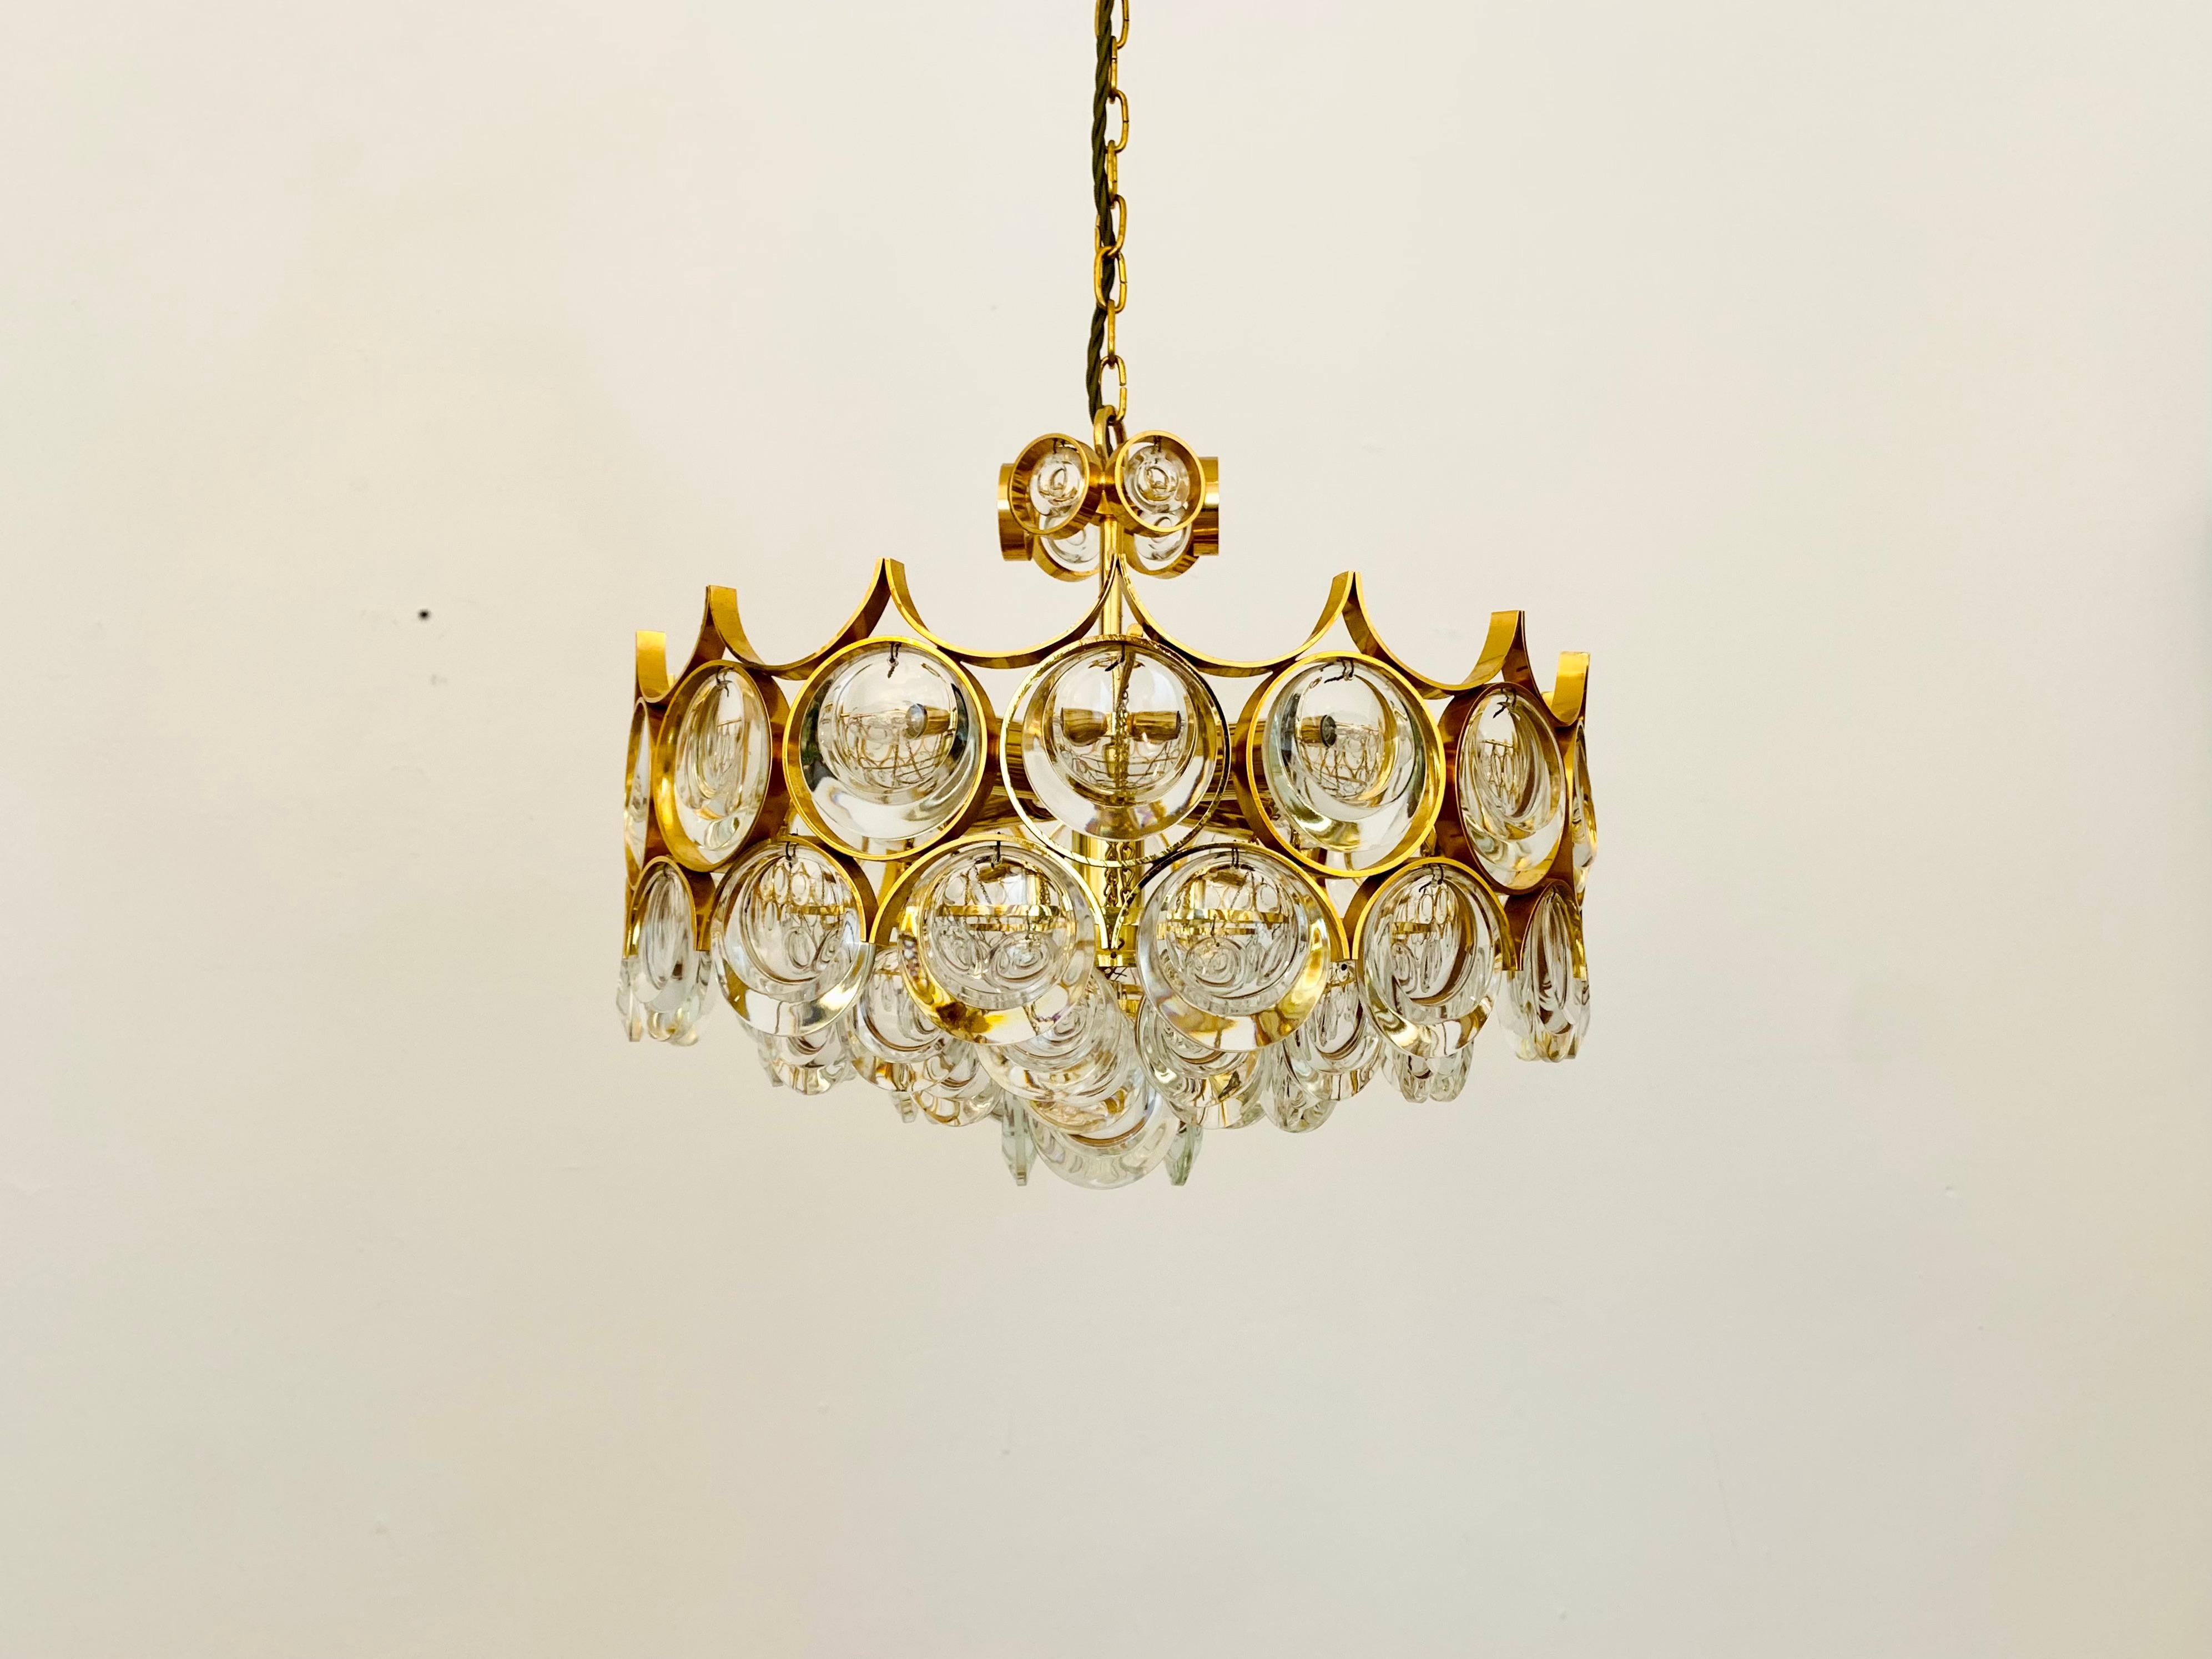 Extremely beautiful and high quality chandelier from the 1960s.
The high-quality workmanship and the very elegant material impress at first glance.
Exceptionally beautiful design.
The crystals spread a spectacular play of light in the